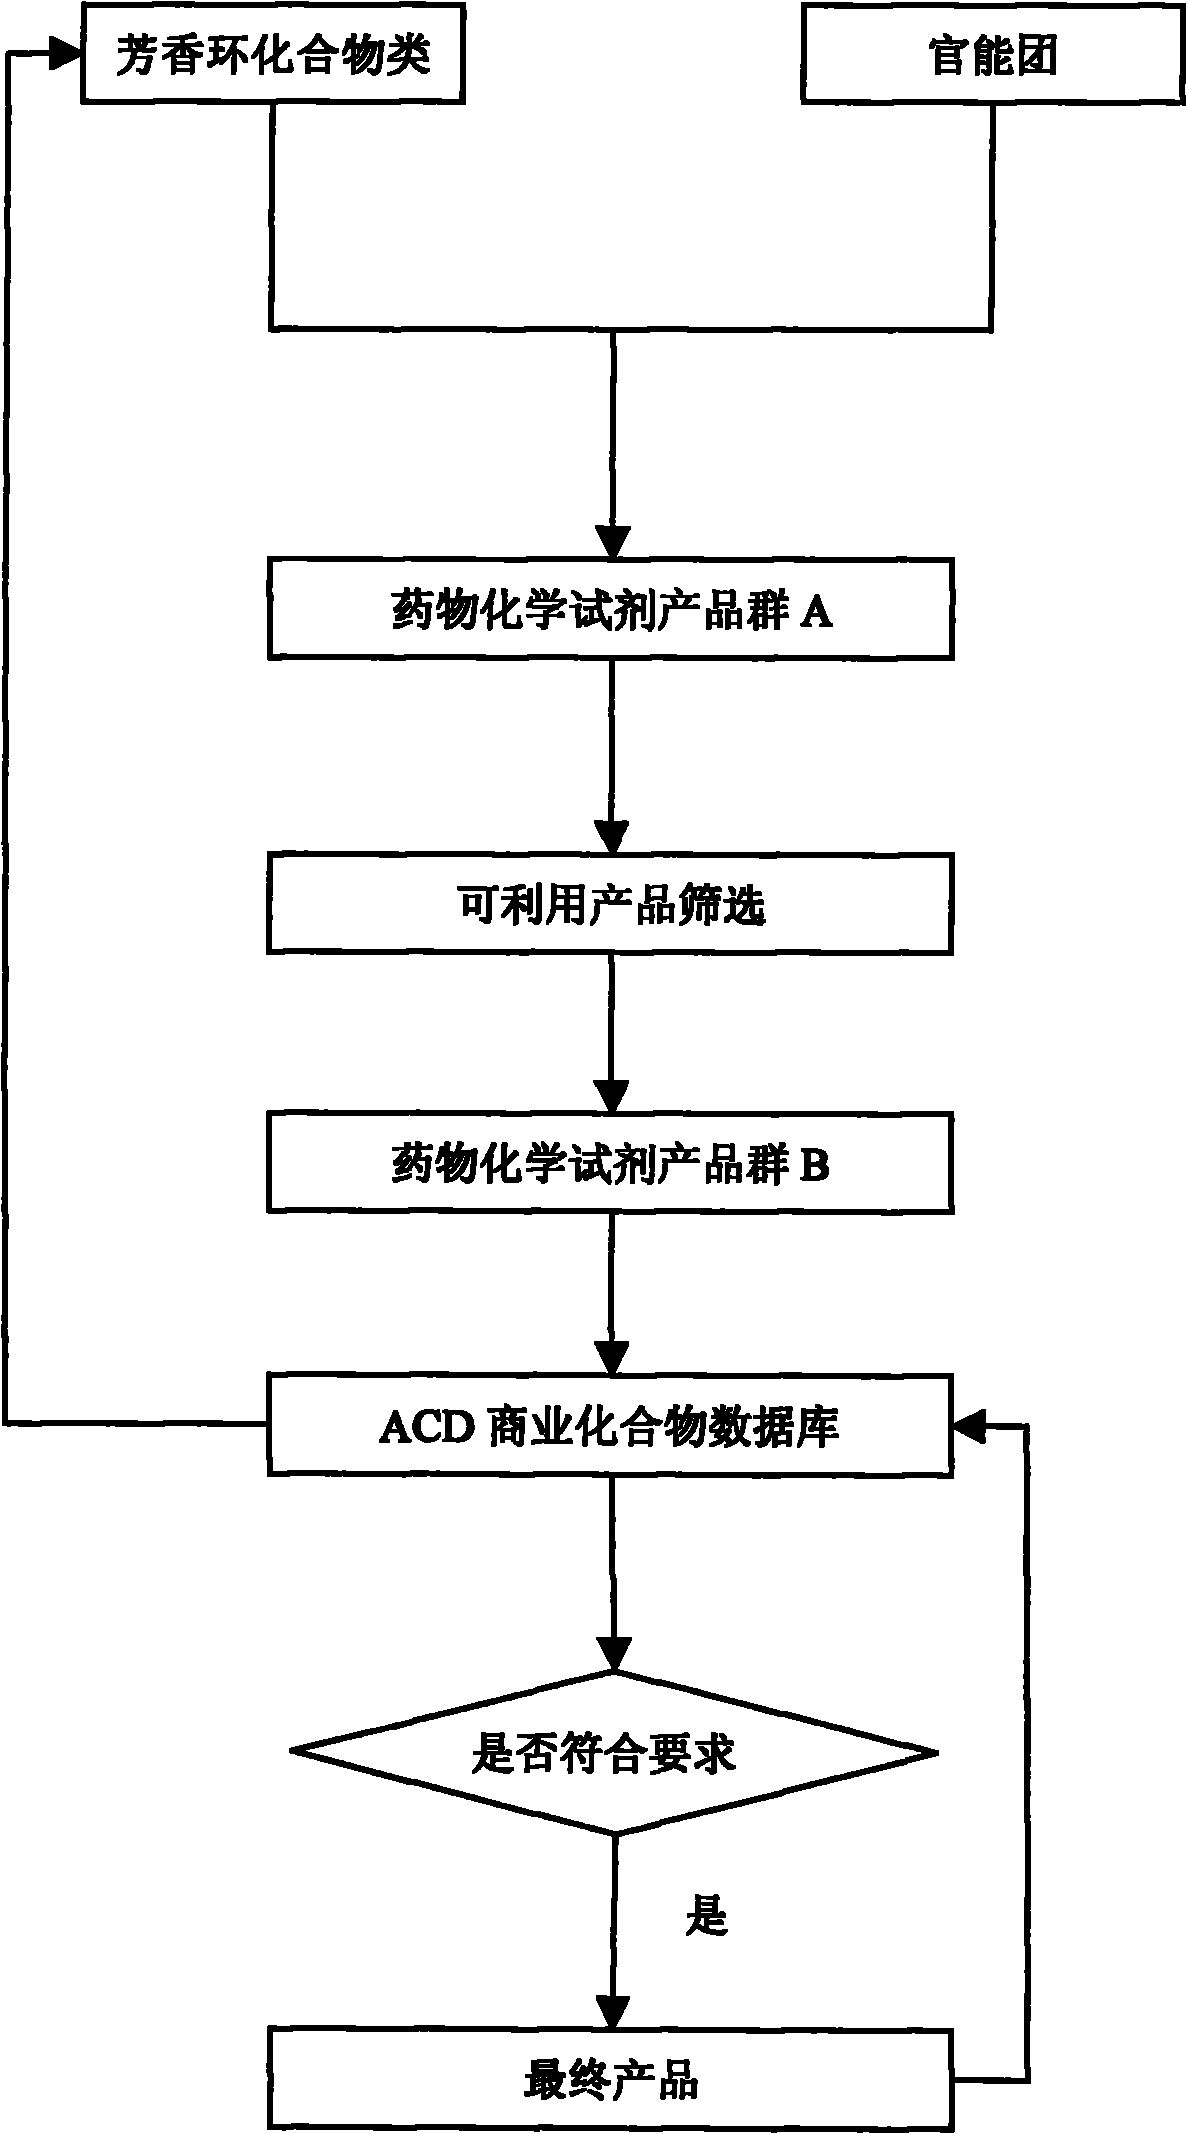 Design and production flow process of medicine development chemical reagent